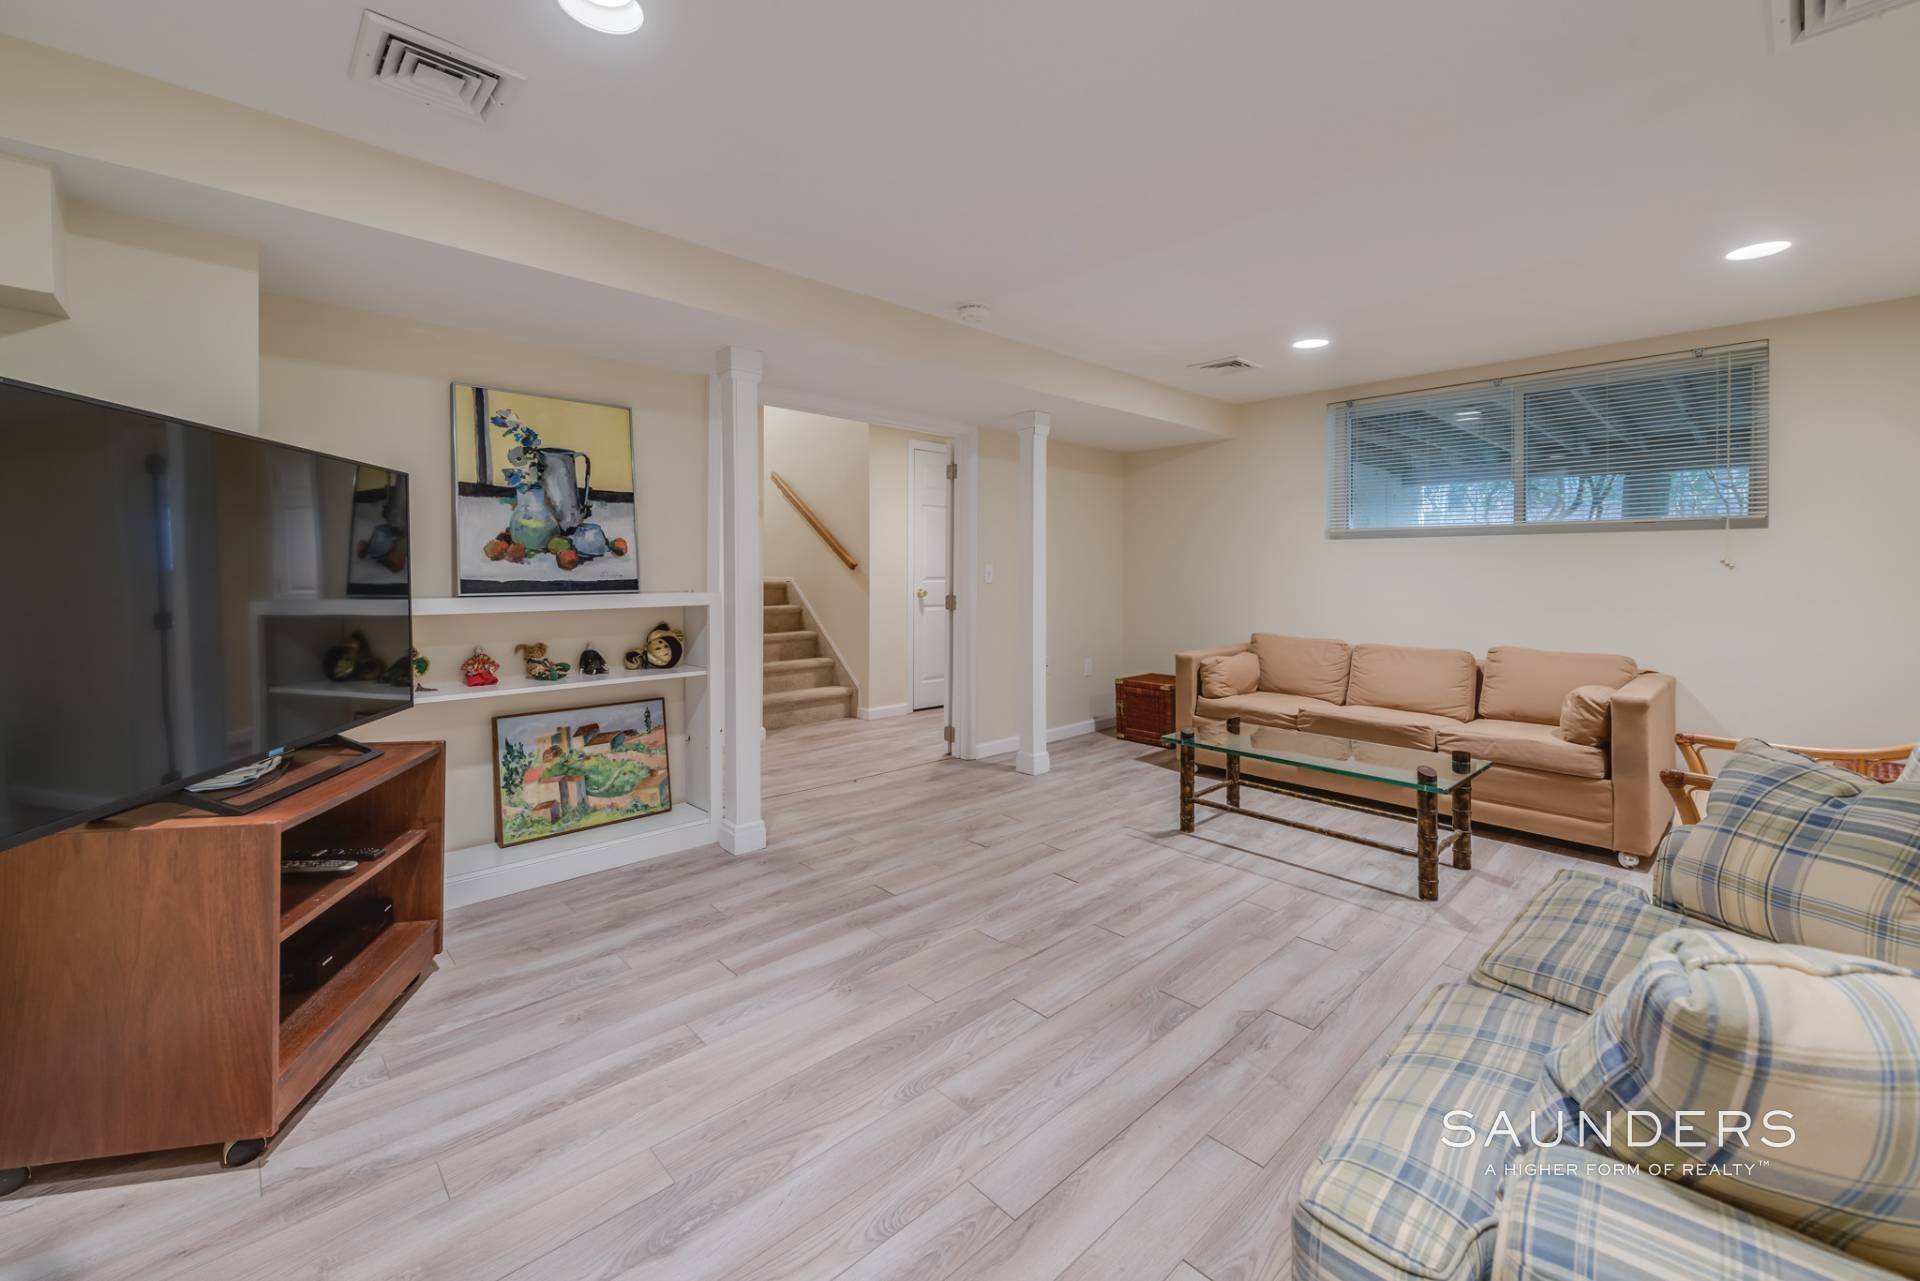 13. Condominiums at Easy Living In A Large Four Bedroom, Four Bath Condo With Tennis 197 Treescape Drive, Cluster 4, Unit 9b, East Hampton, NY 11937